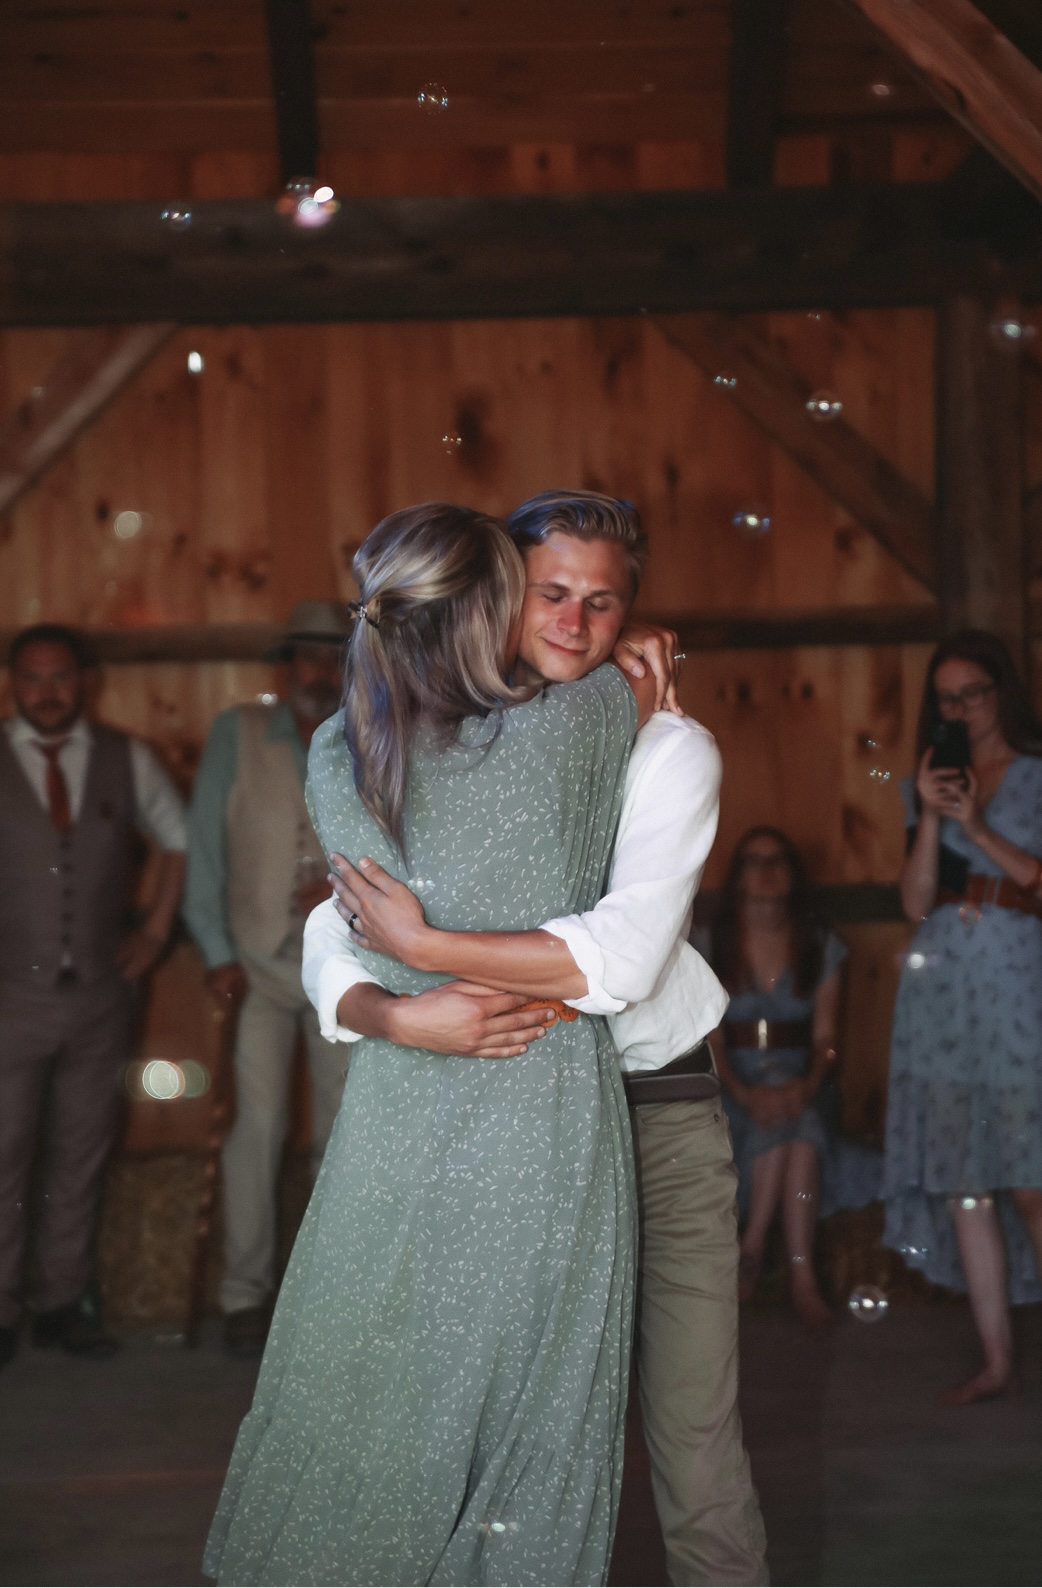 Man and Woman dancing in barn under twinkly lights.